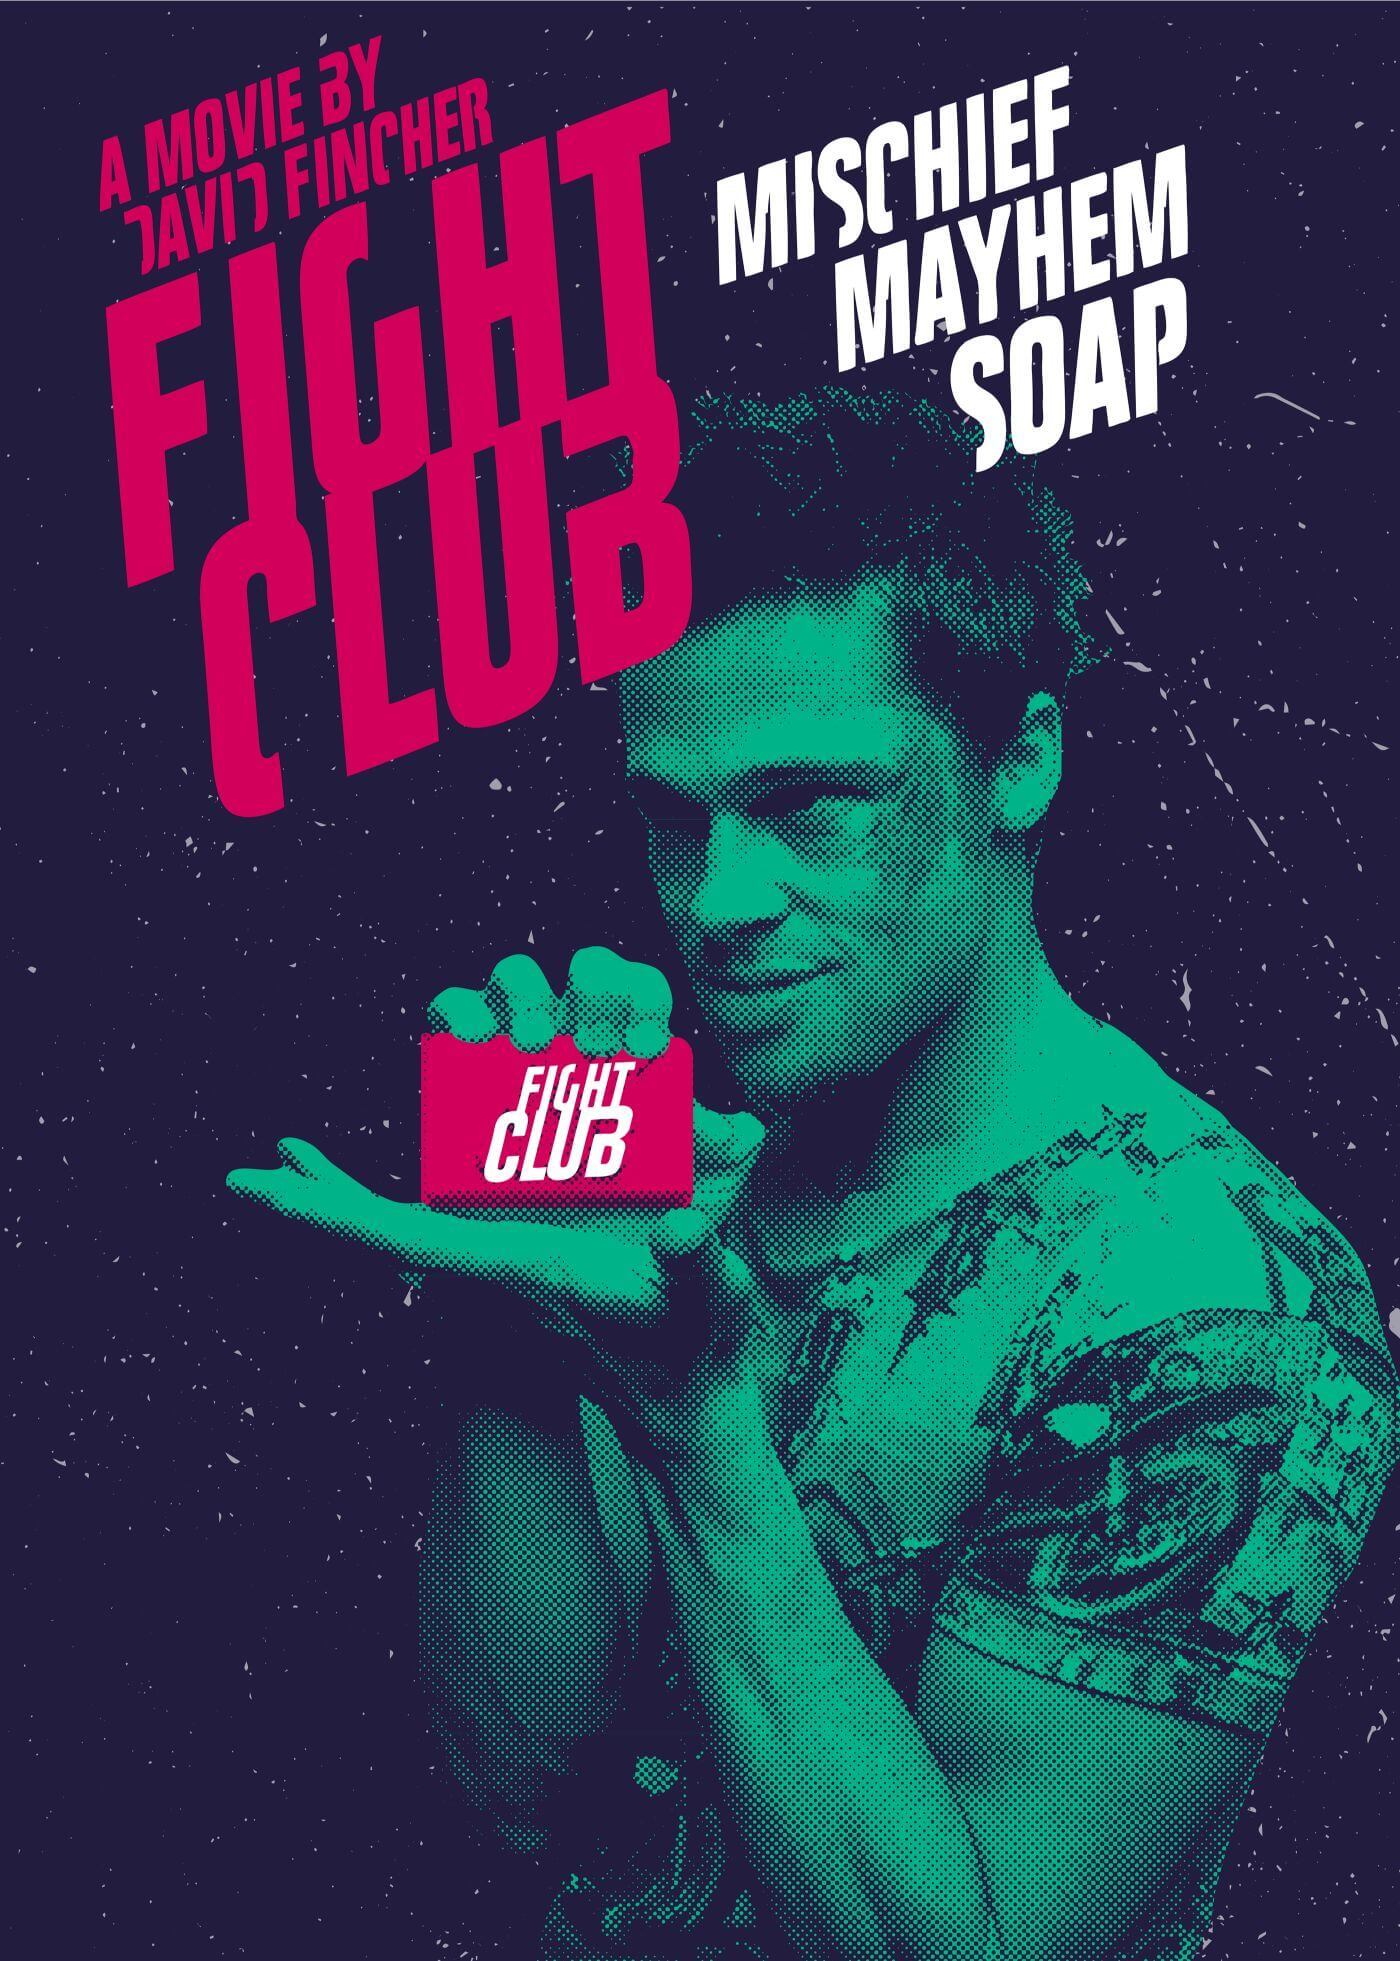 Fight Club - Brad Pitt - Soap - Hollywood Cult Classic English Movie Poster  - Large Art Prints by Alice | Buy Posters, Frames, Canvas & Digital Art  Prints | Small, Compact, Medium and Large Variants